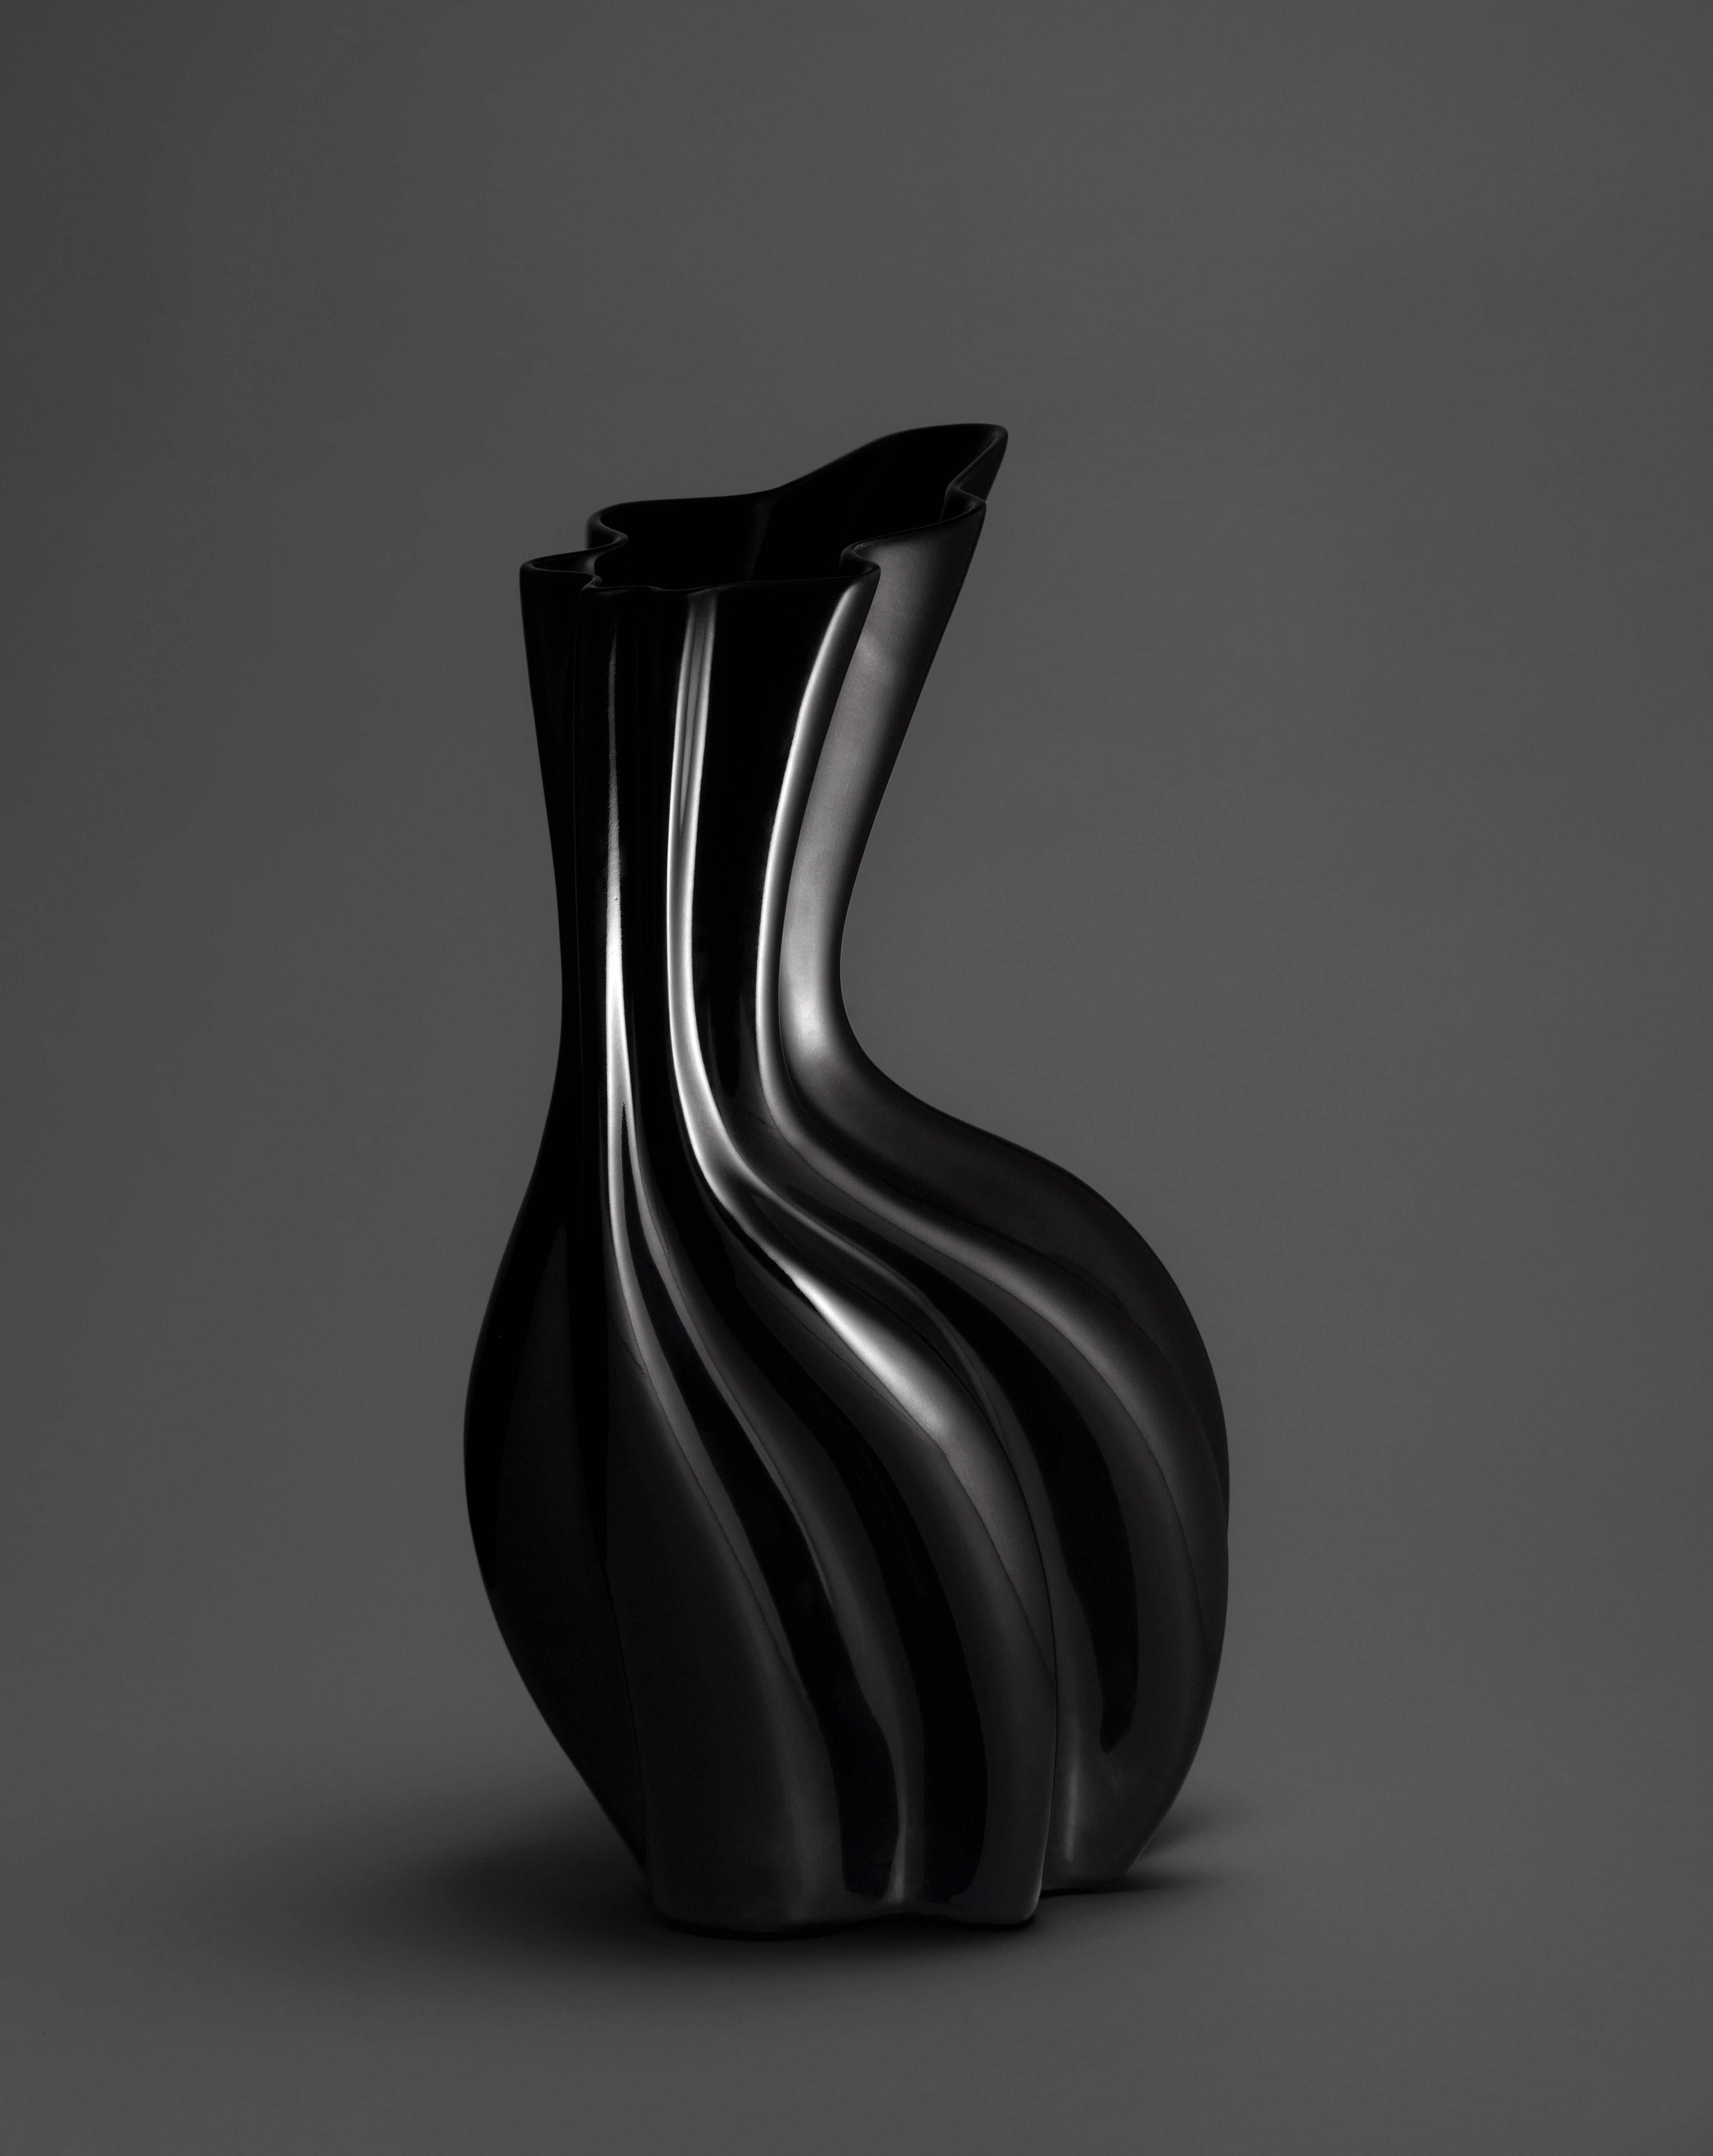 If you are looking for a vase that is more than an accessory, becoming a true piece of art in your place, then you will definitely love this Sinuo black vase.

More than a simple vase, this organic shaped vase is a perfect choice for turning any